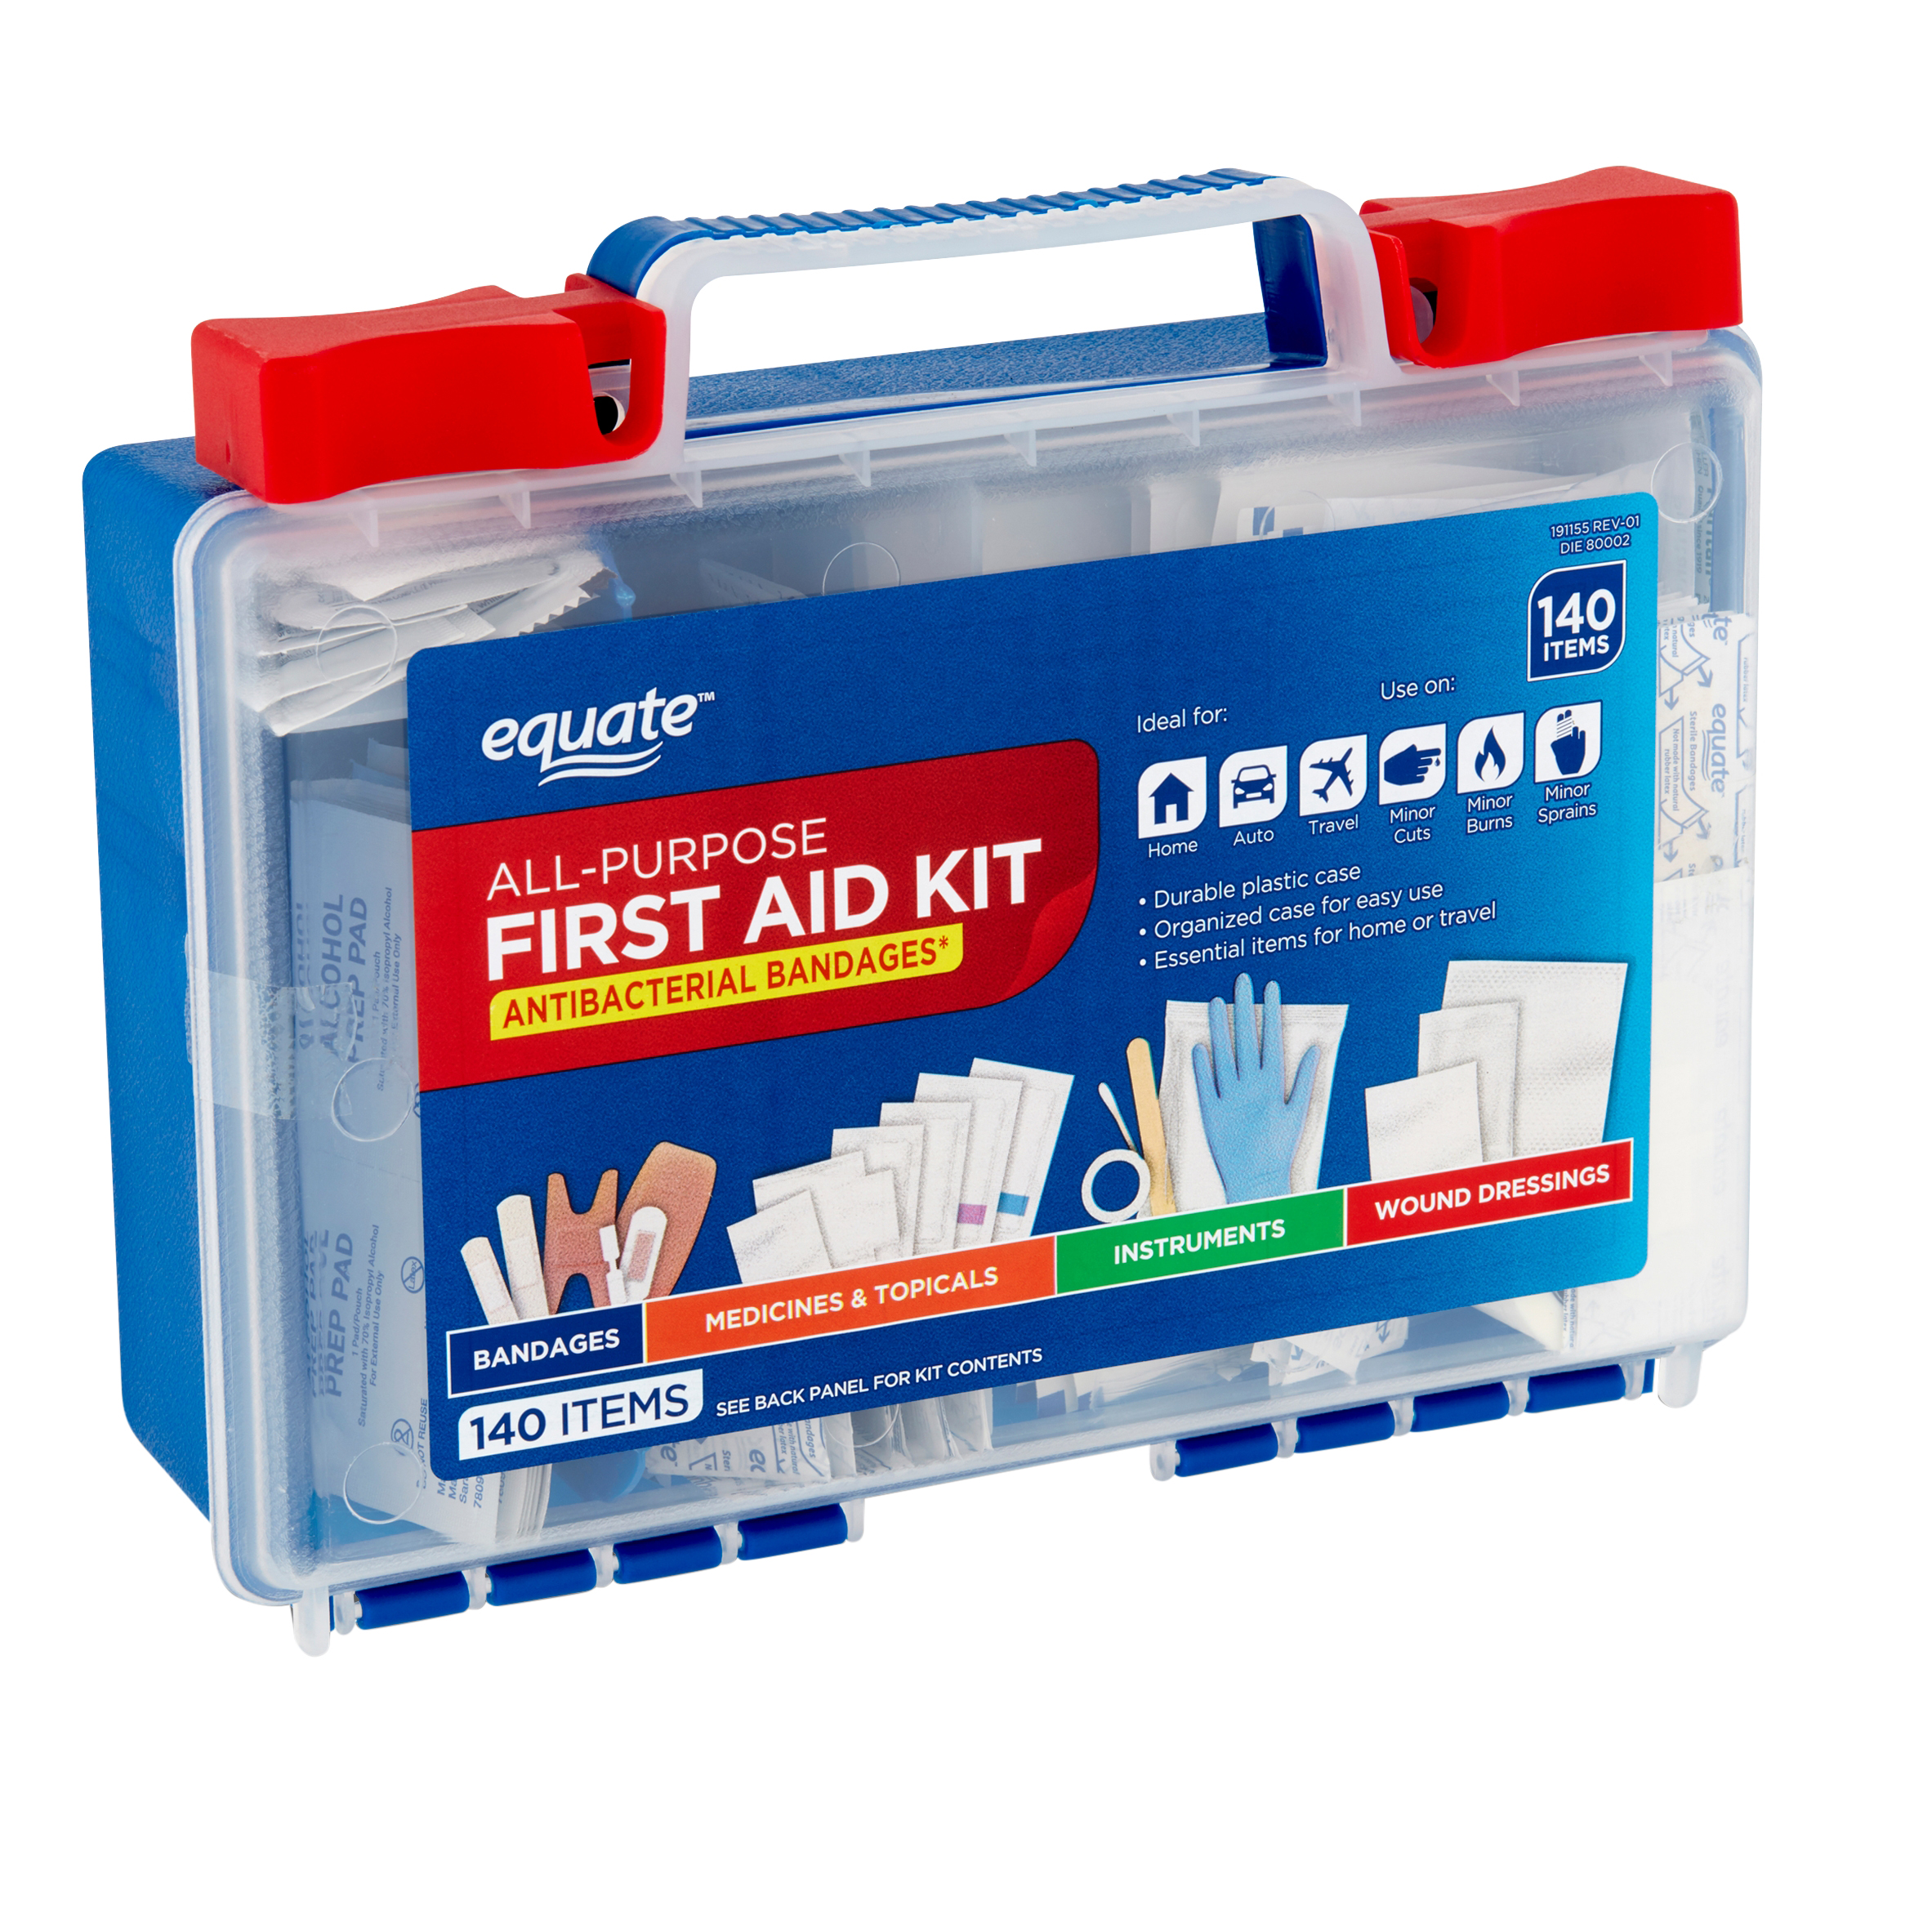 Equate 140pc All Purpose First Aid Kit - image 1 of 11